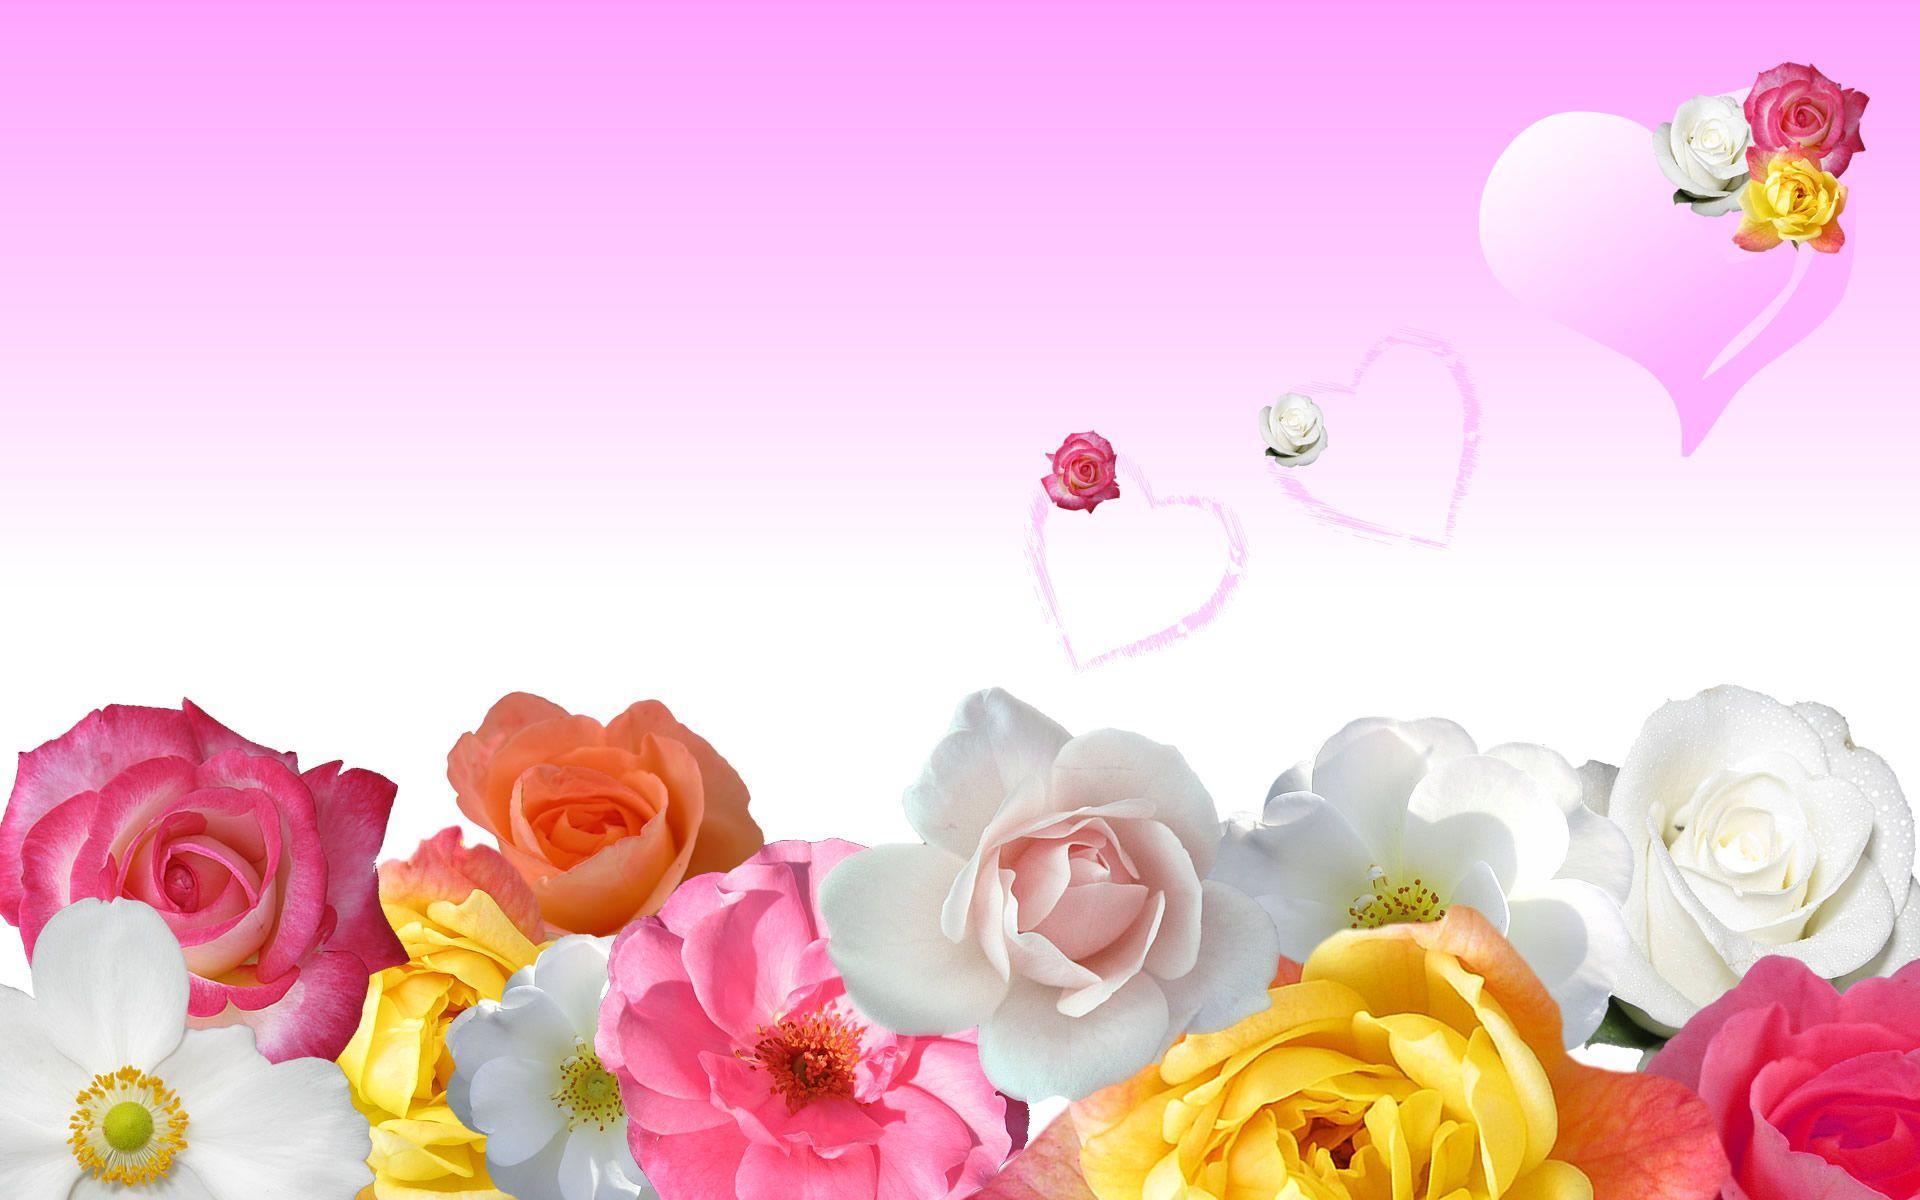 Flowers Wallpapers